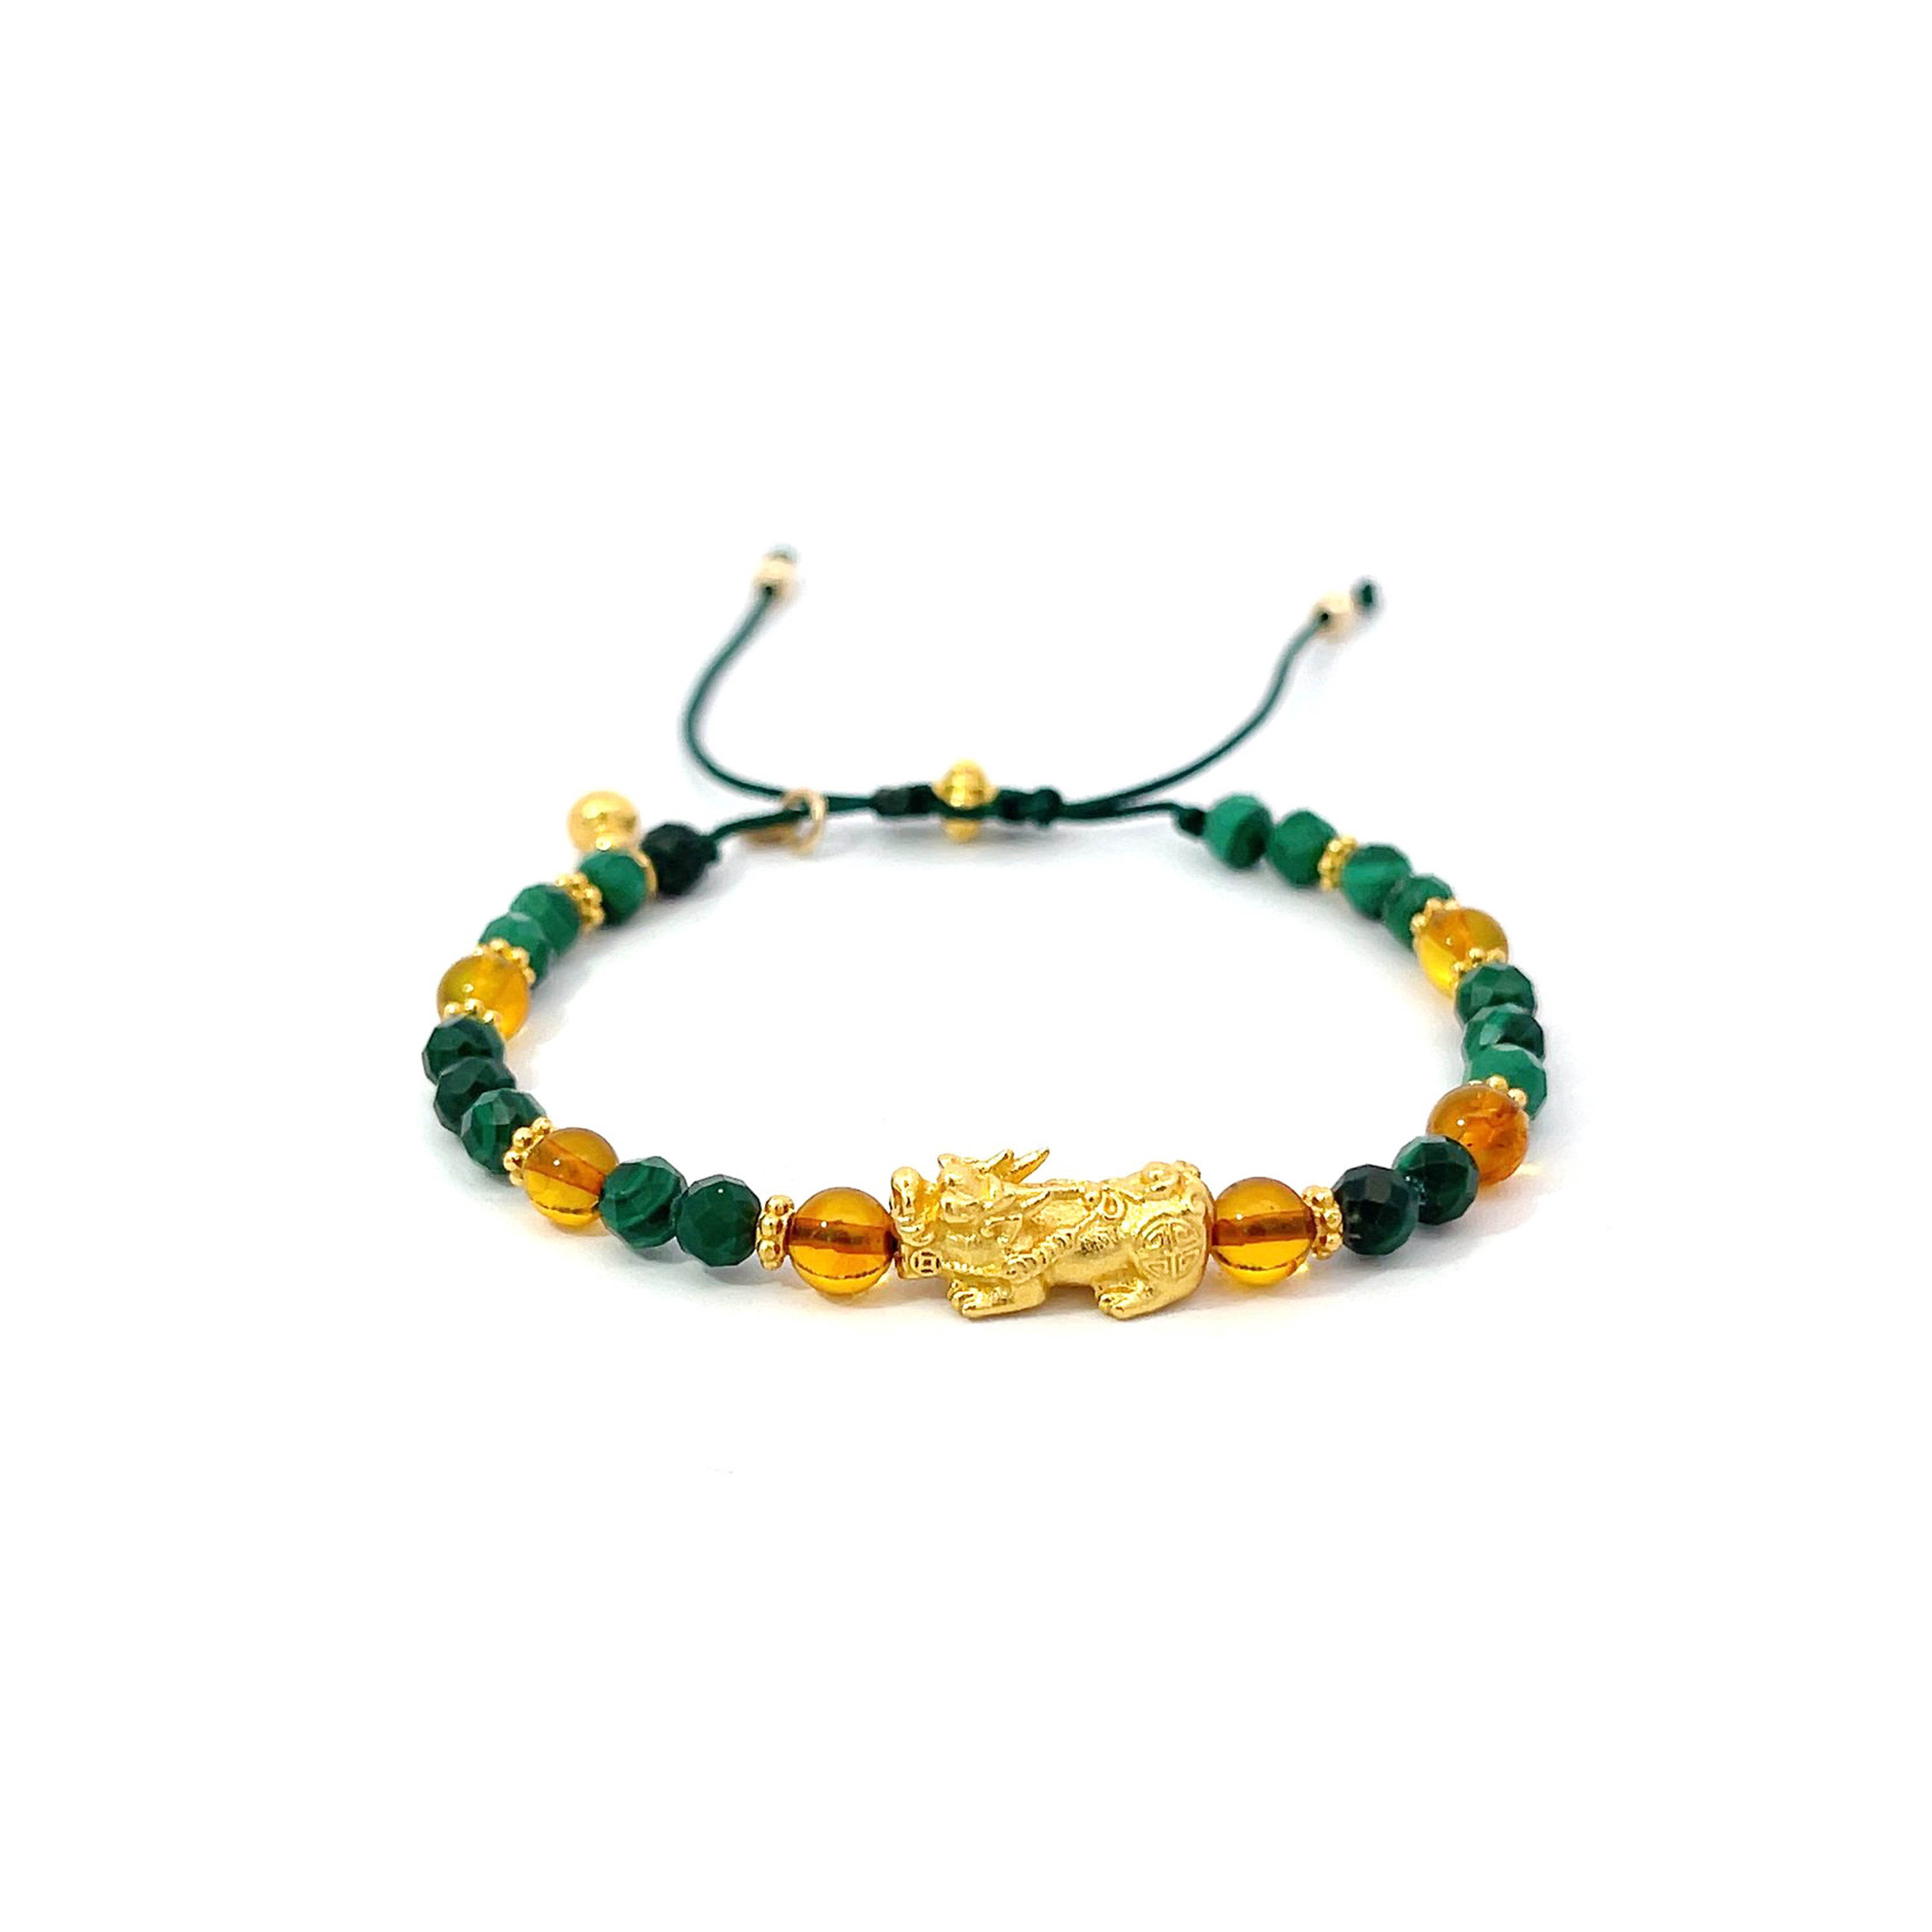 Discover Lucky Amber and Malachite Jewelry